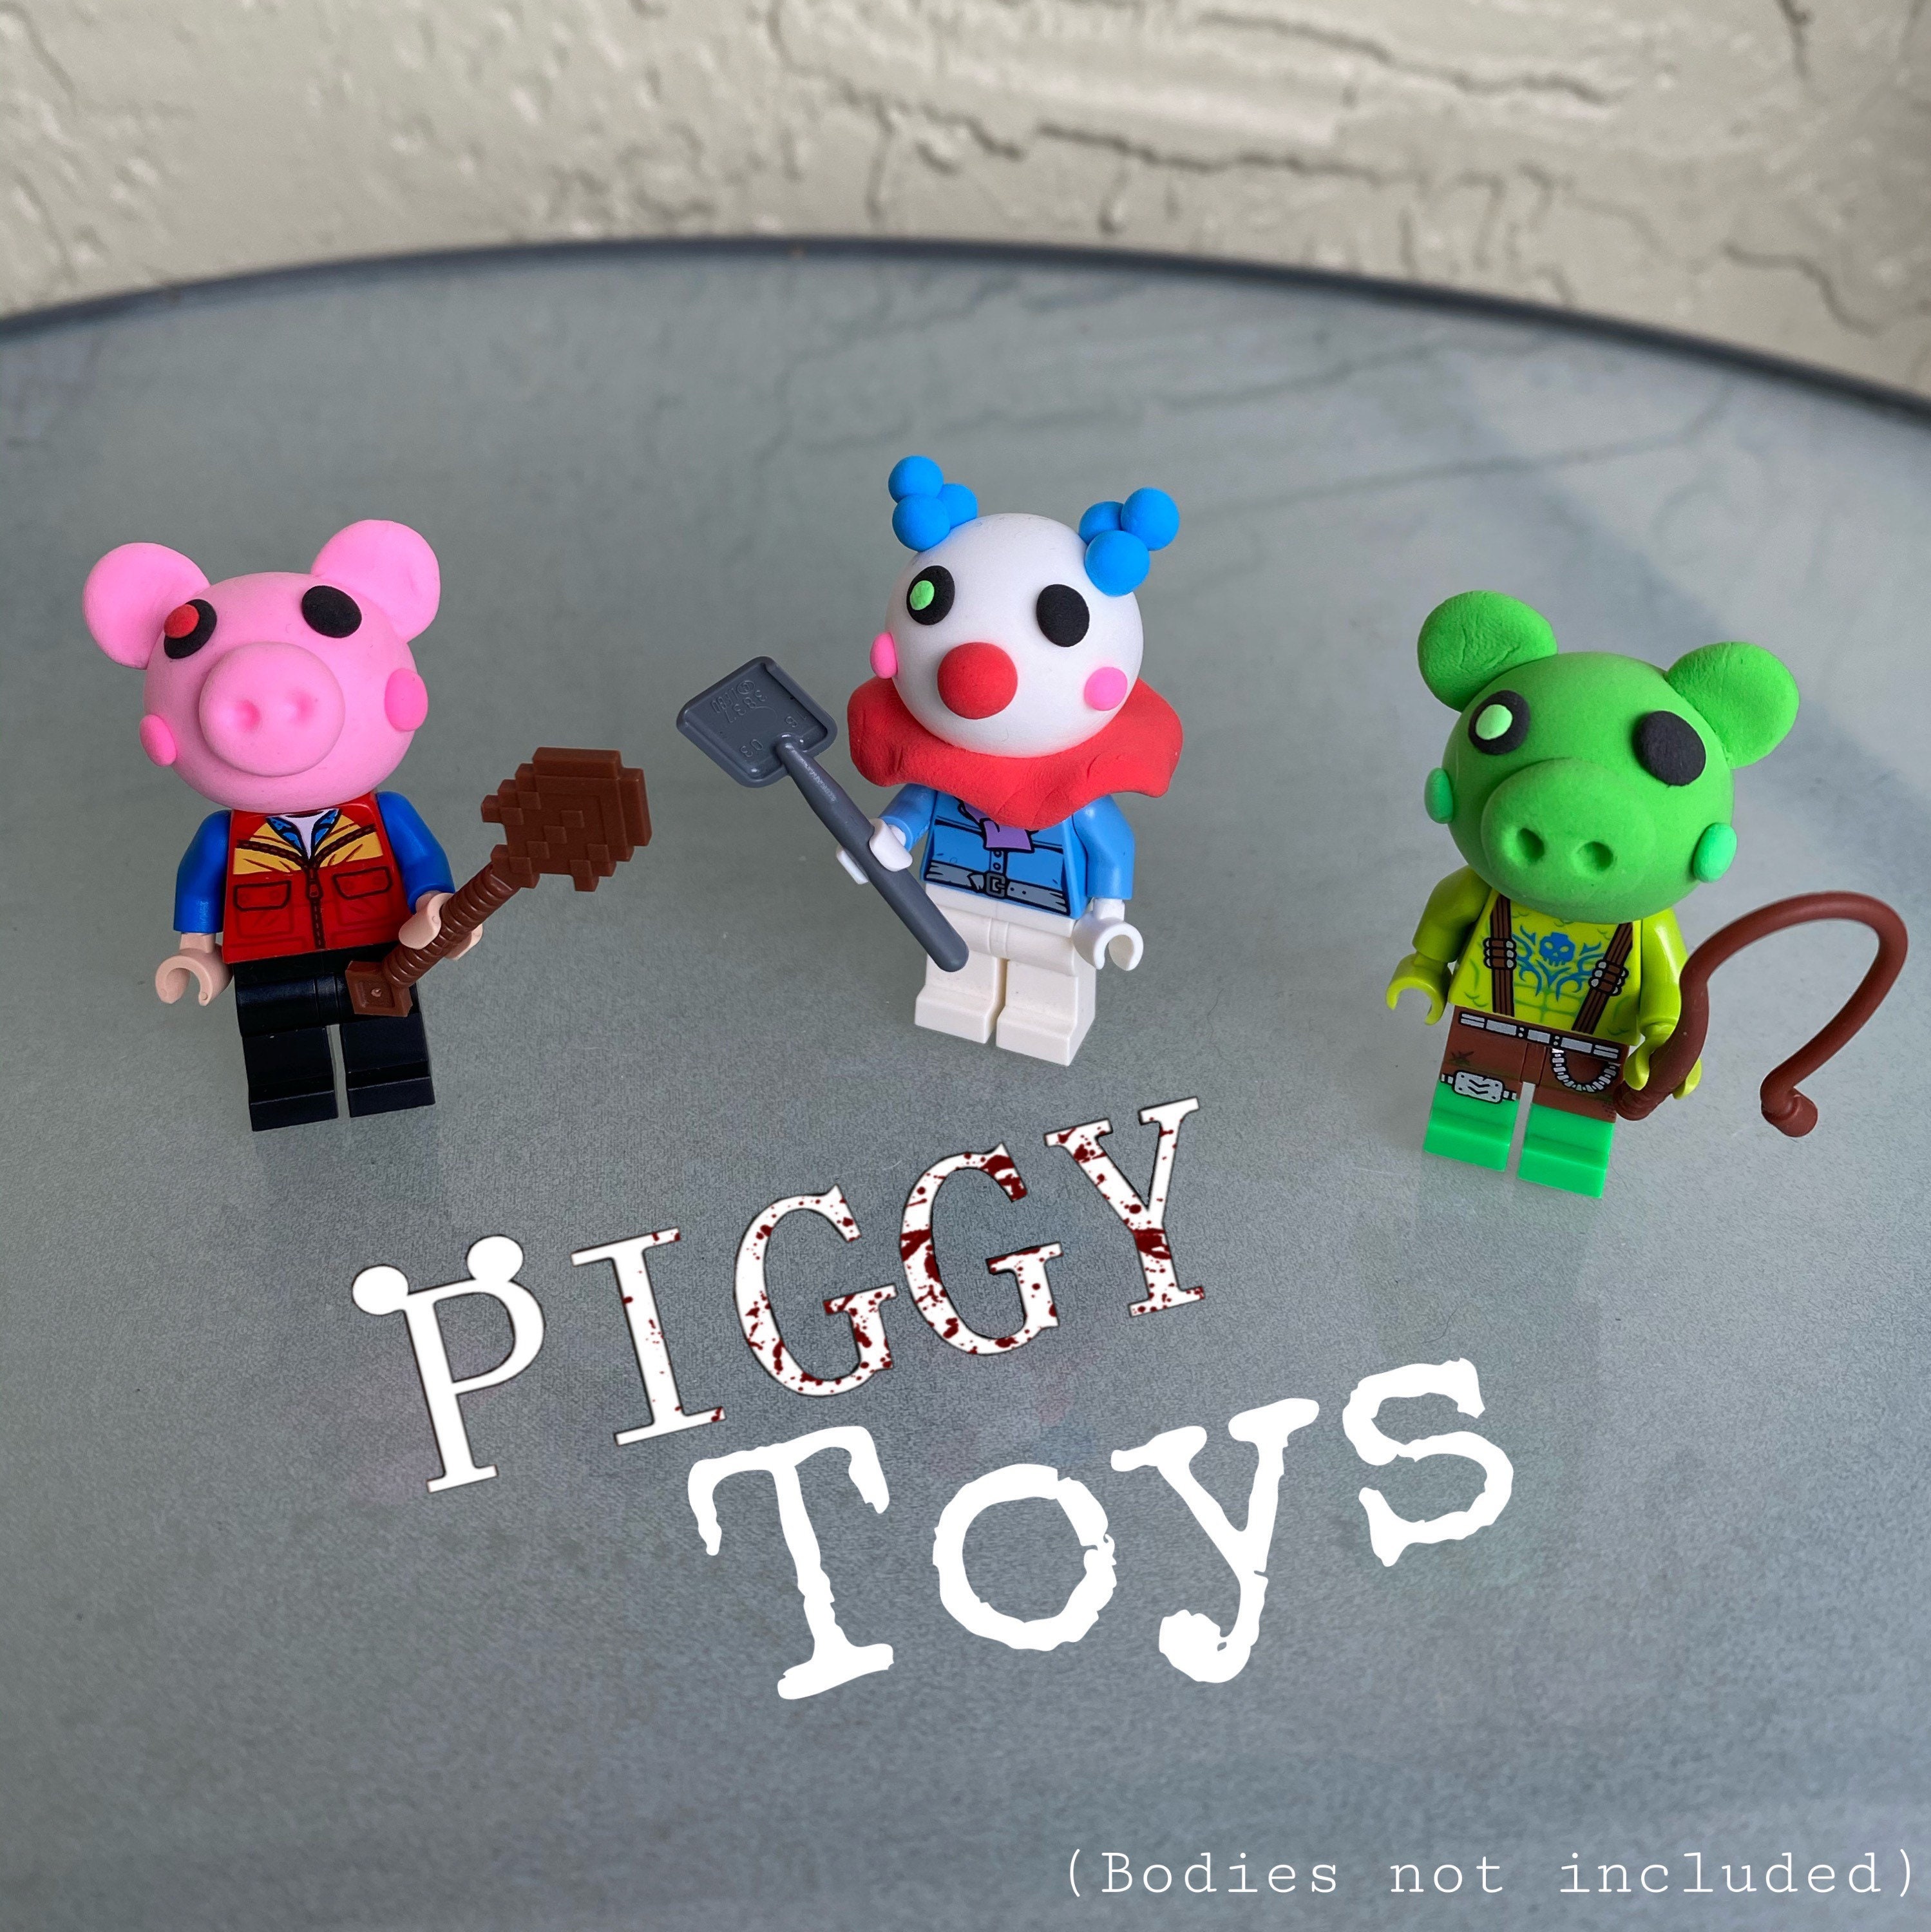 Piggy Toy Heads Piggy Toys fits Roblox and Lego Bodies 